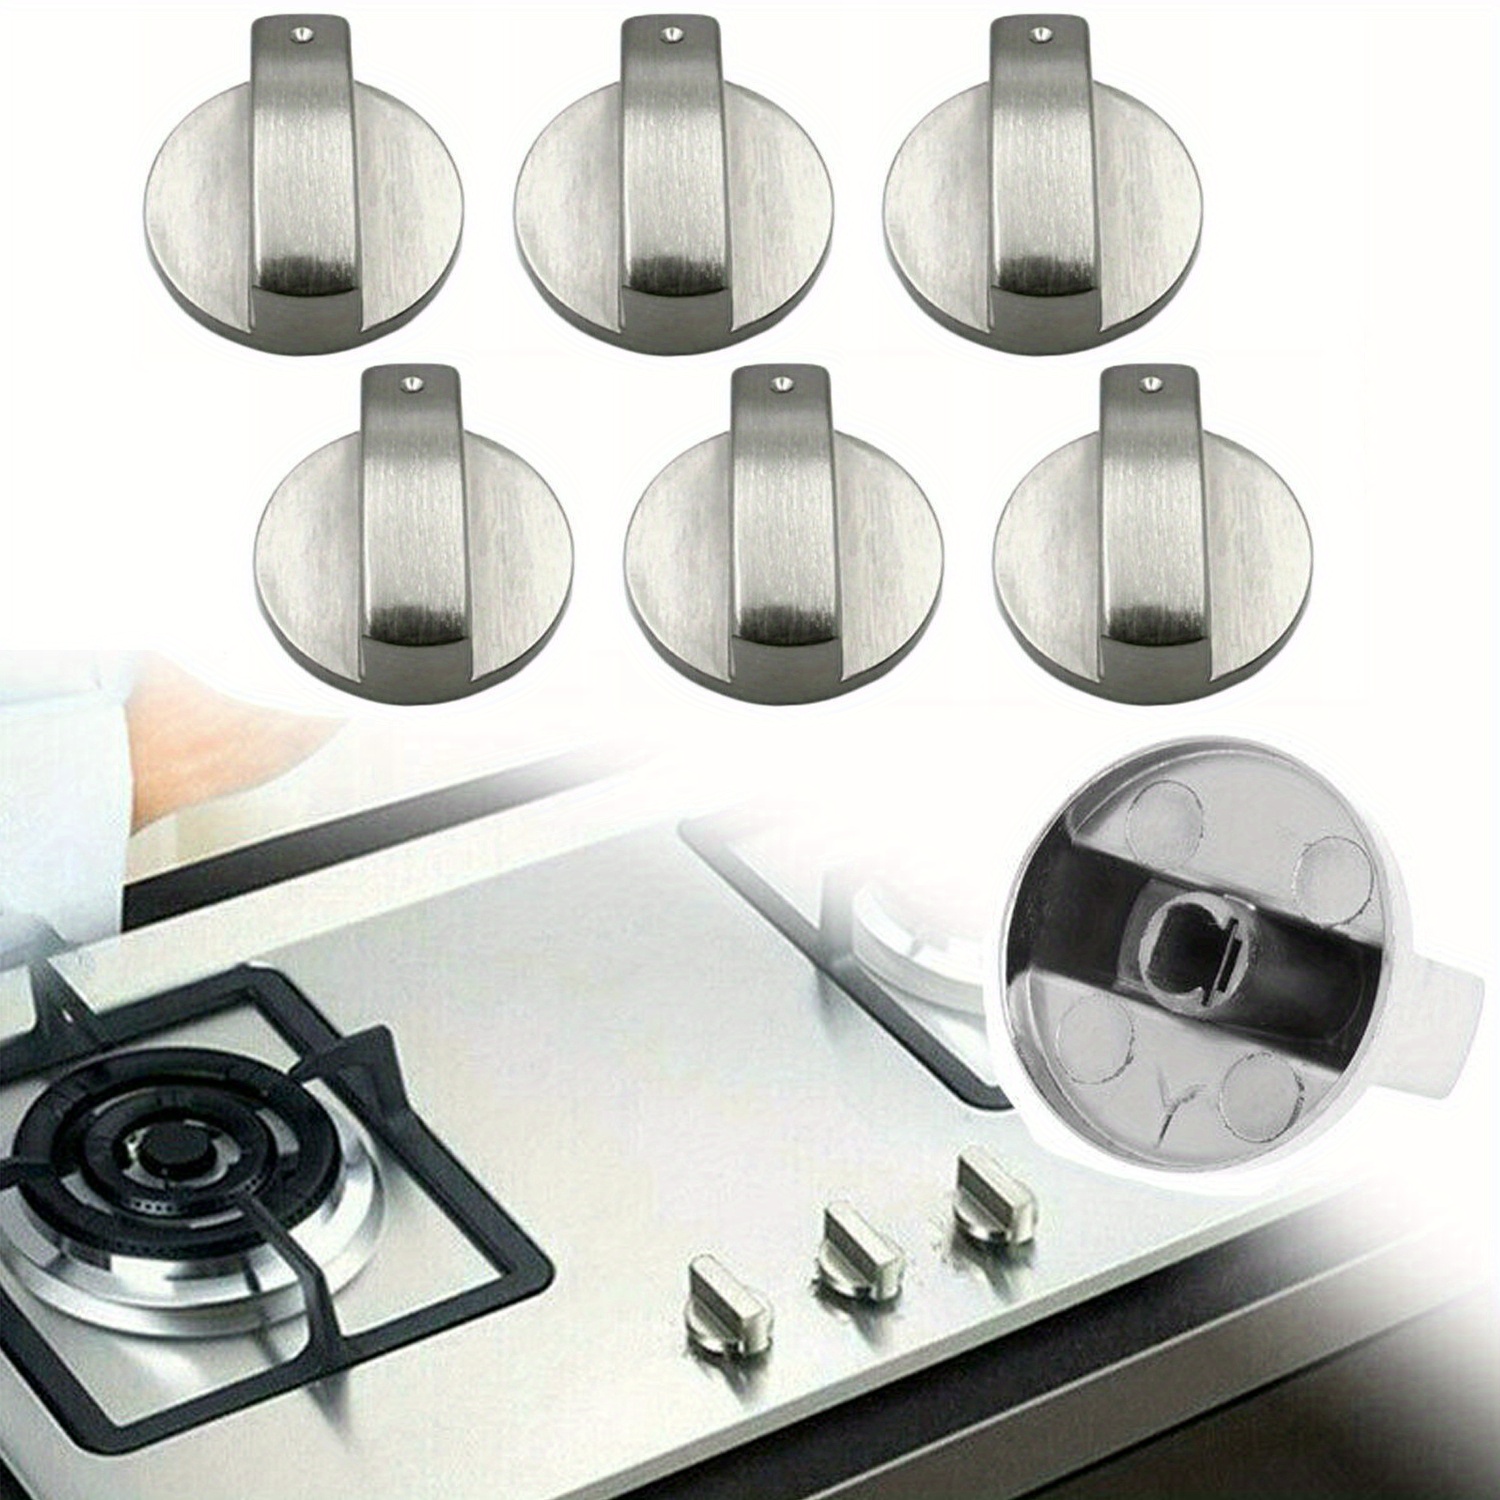 

2/6pcs Gas Stove Switch Gas Stove Knobs, Home Kitchen Cooker Oven Knobs, Cooktop Metal Switch Control